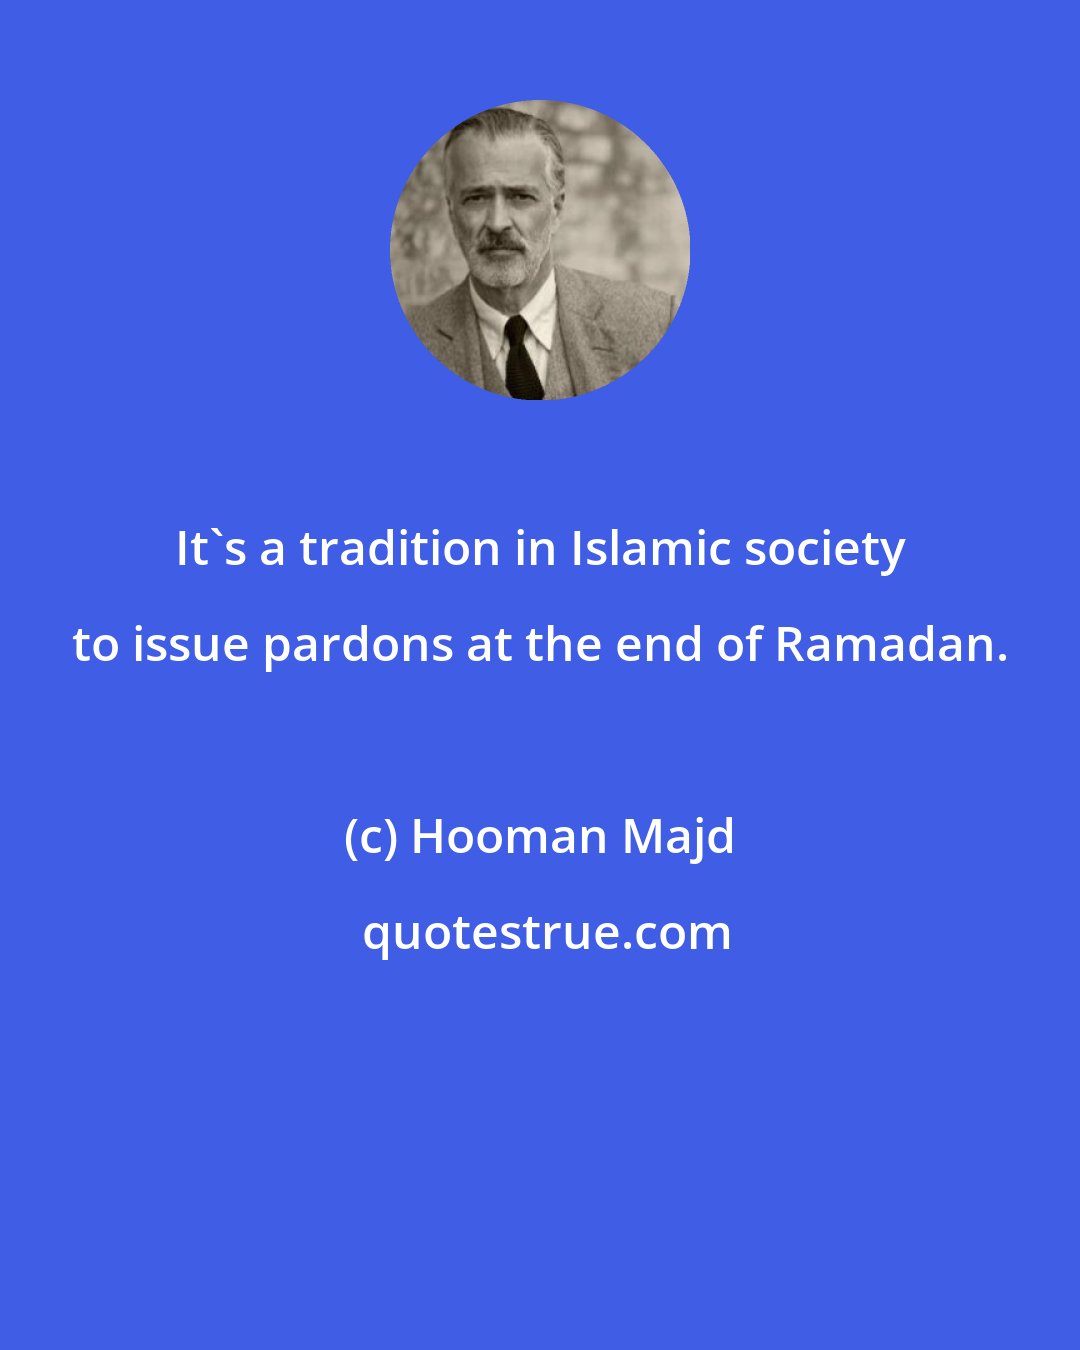 Hooman Majd: It's a tradition in Islamic society to issue pardons at the end of Ramadan.